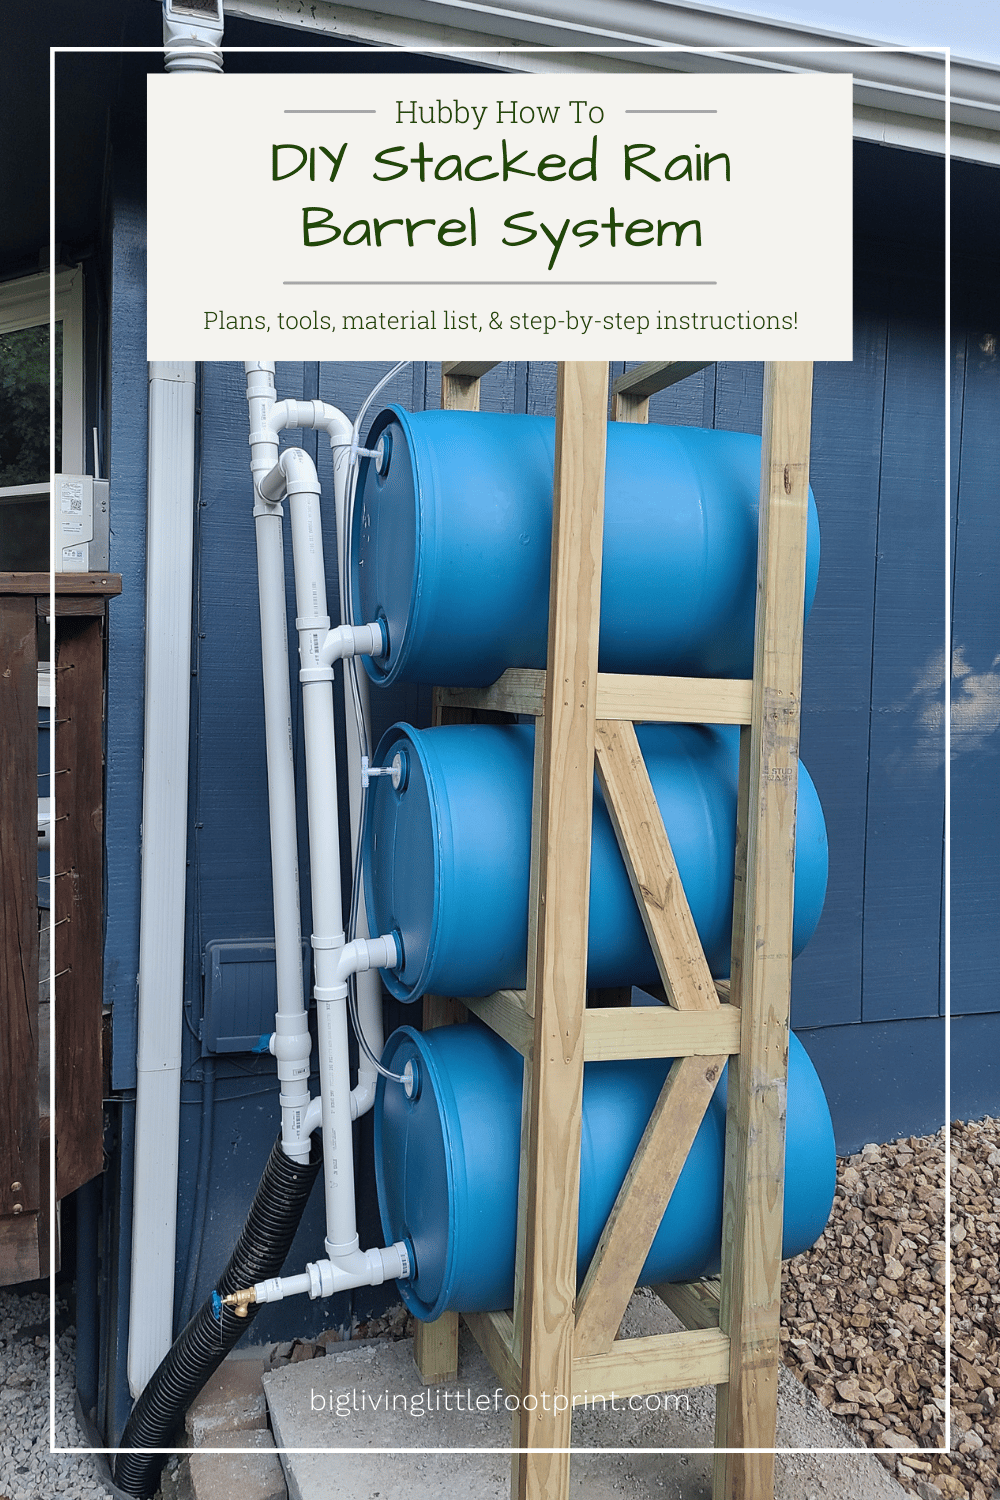 Hubby How To – DIY Stacked Rain Barrel System